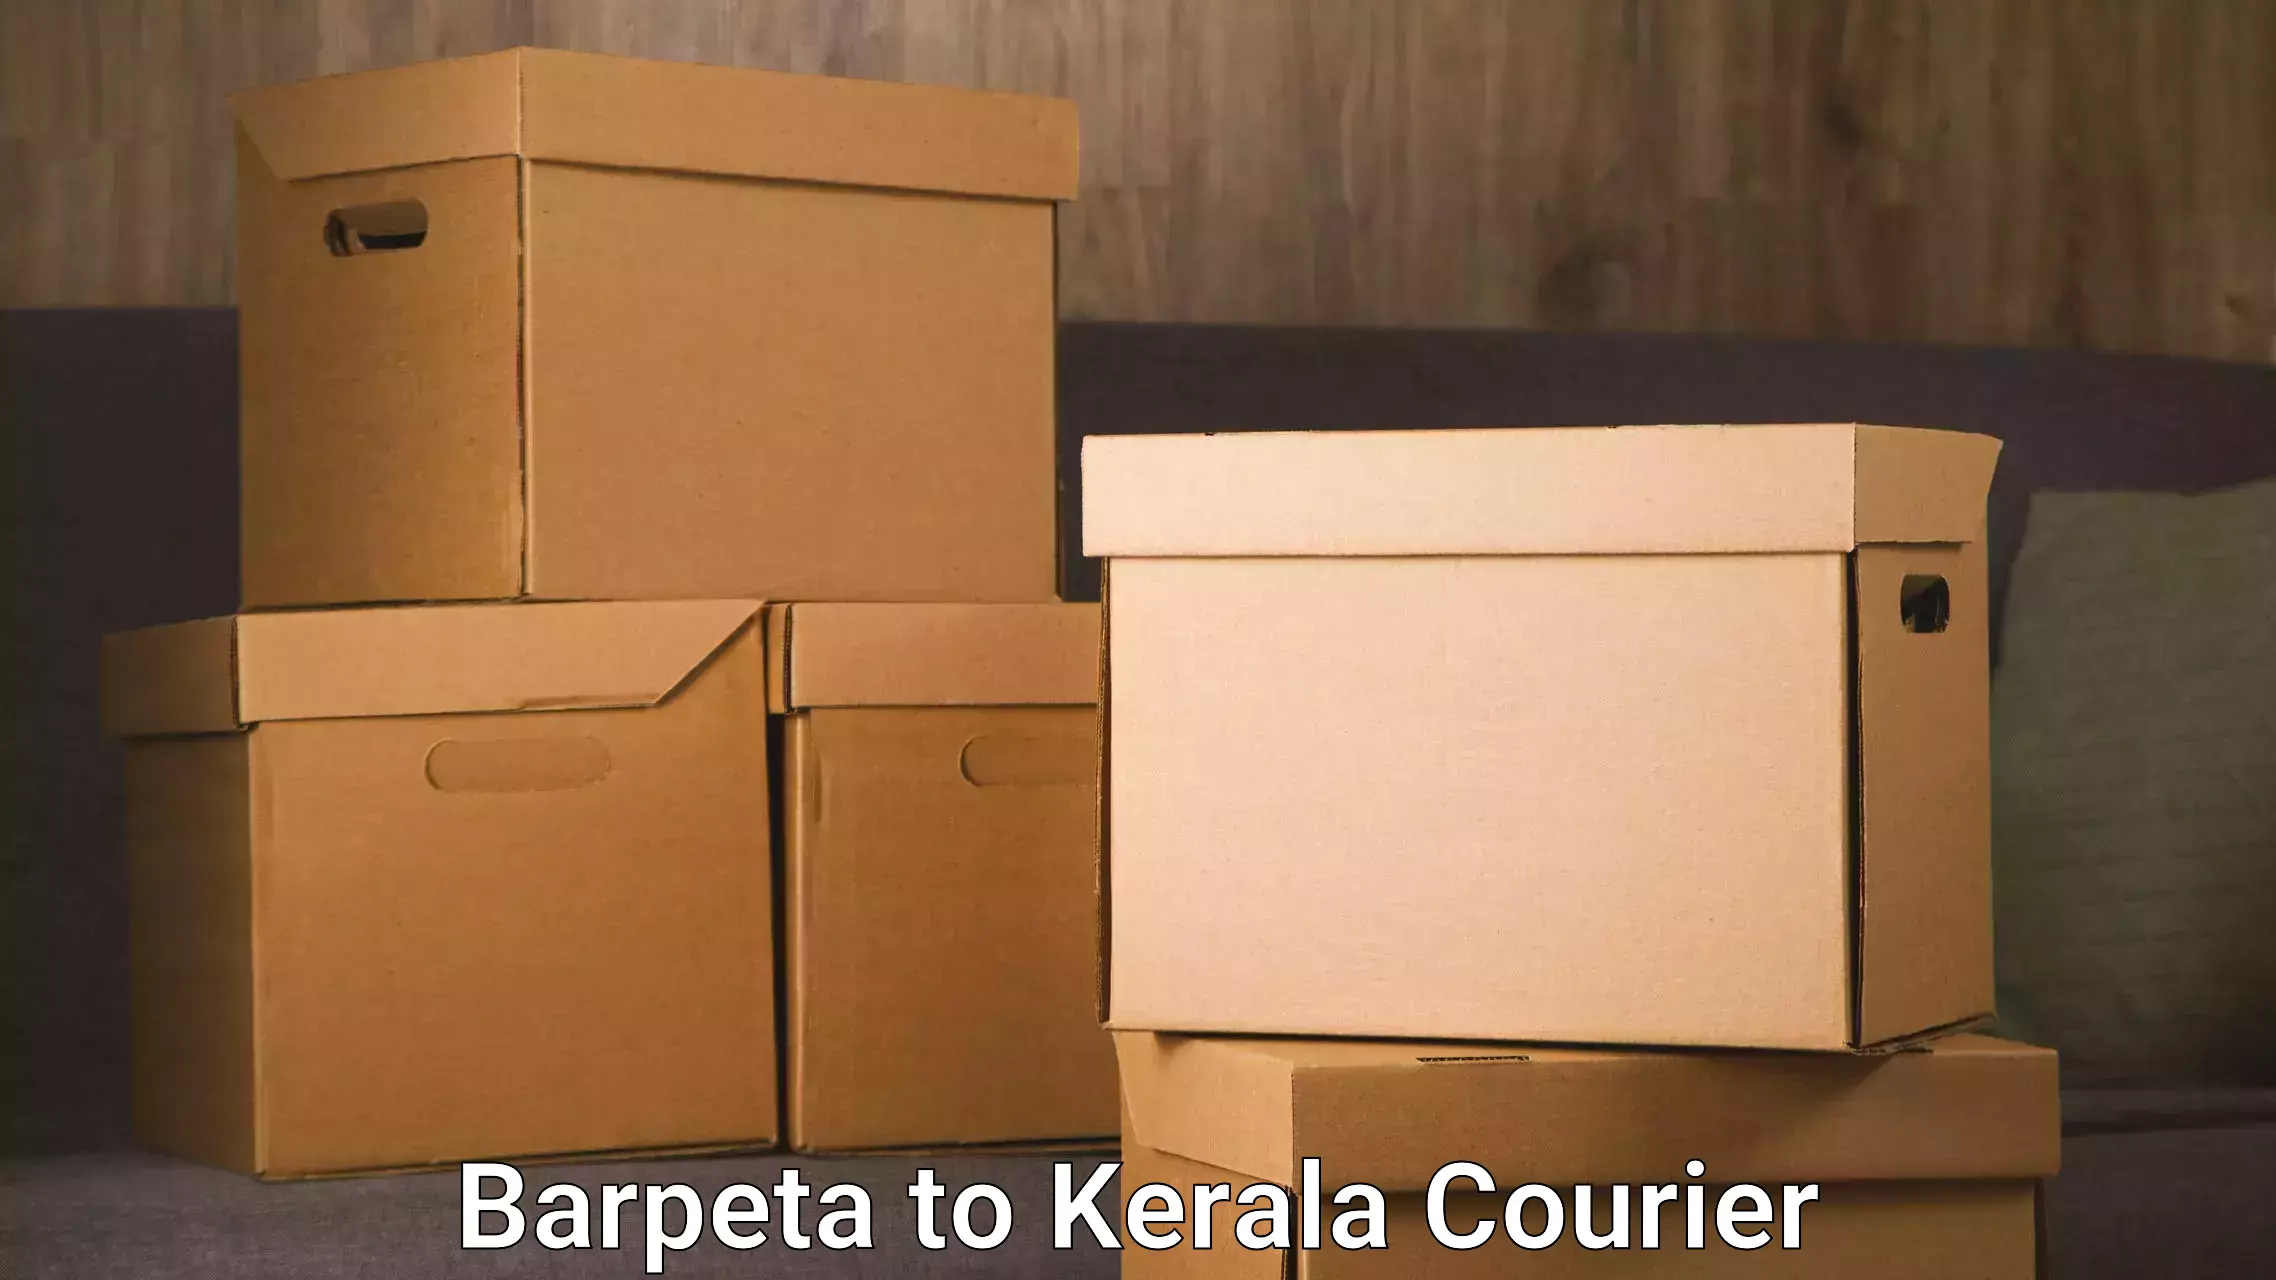 Automated parcel services Barpeta to Koothattukulam